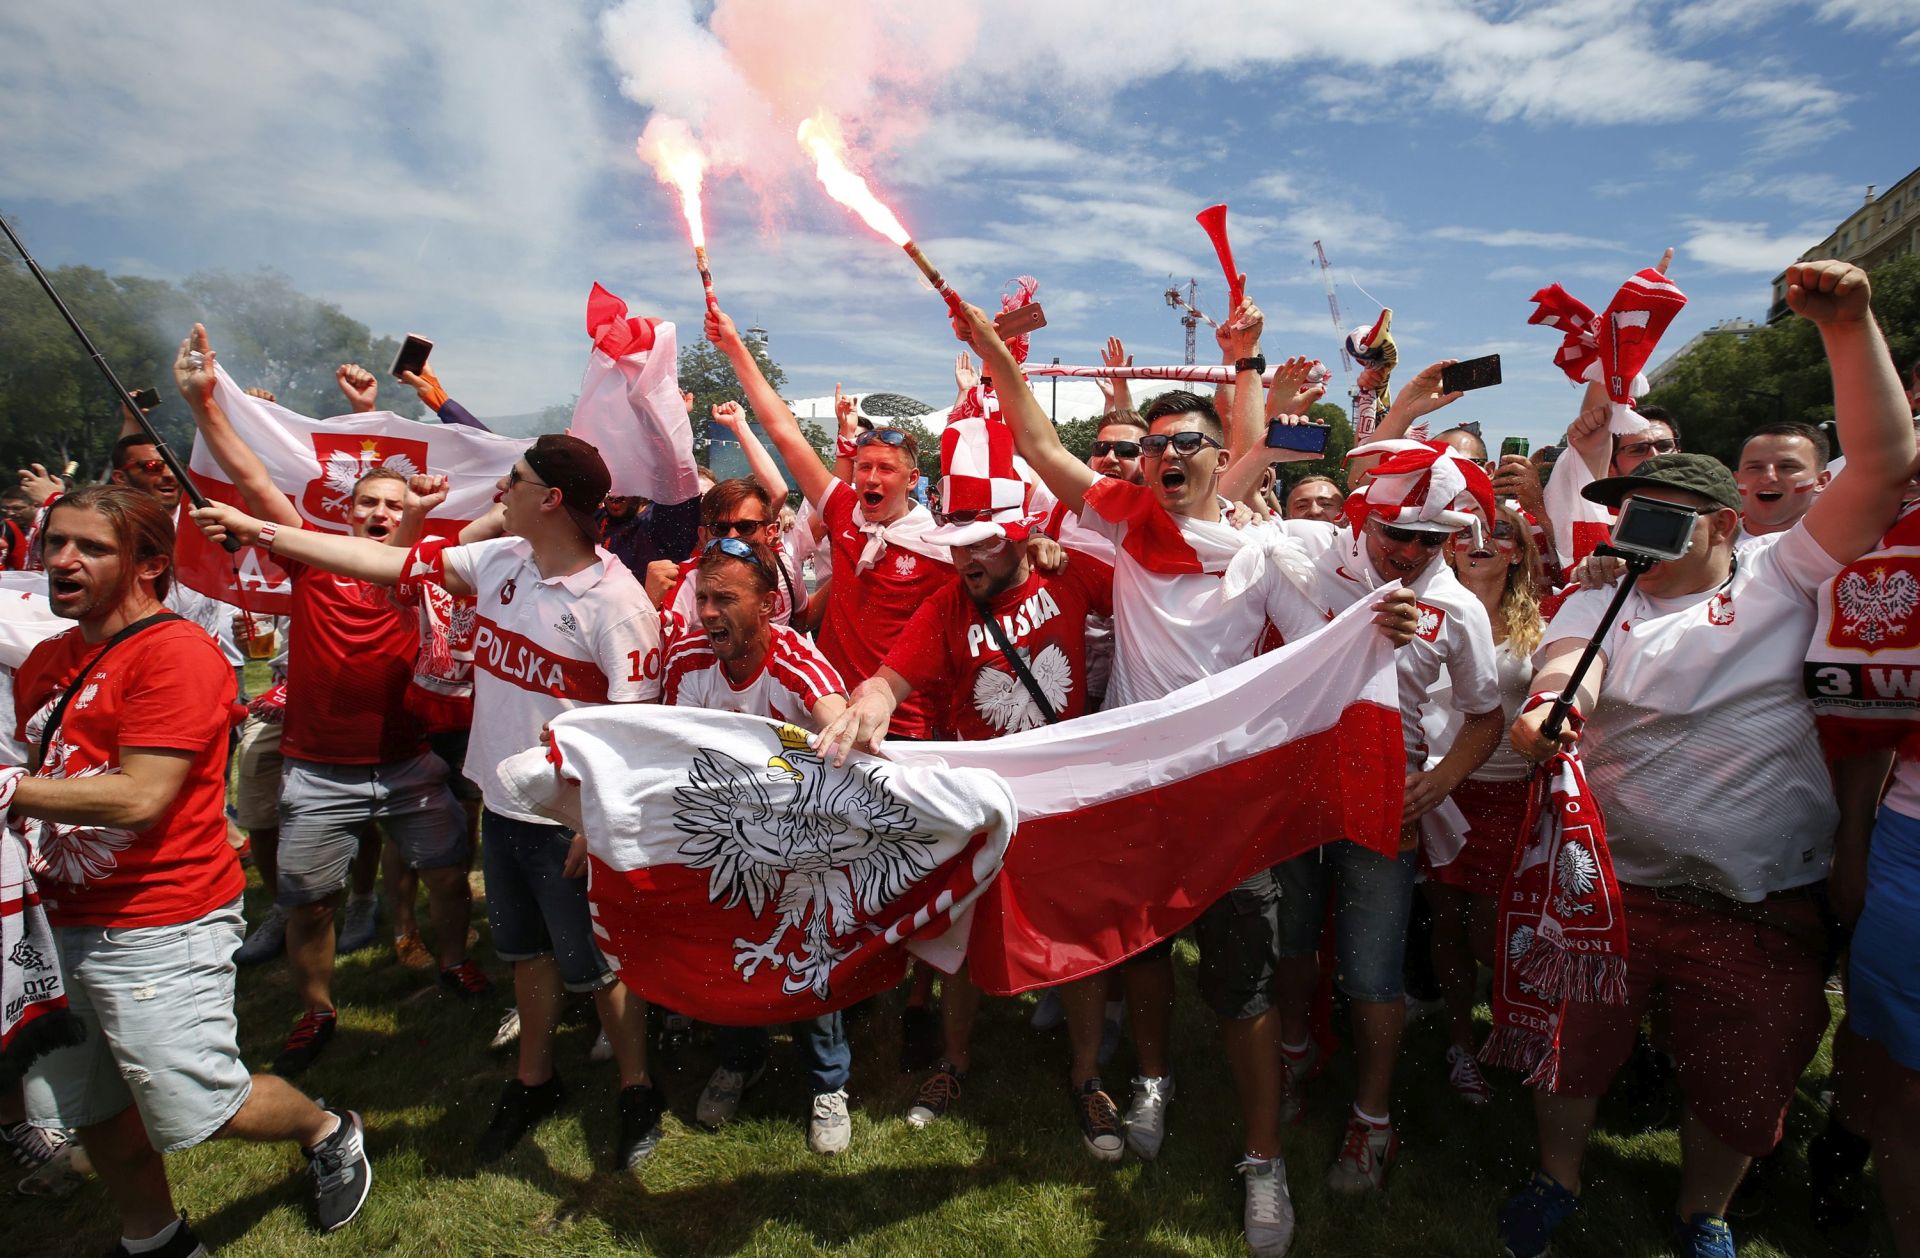 epa05381306 Supporters of Poland gather before the UEFA EURO 2016 group C preliminary round match between Ukraine and Poland at Stade Velodrome in Marseille, France, 21 June 2016.  EPA/GUILLAUME HORCAJUELO